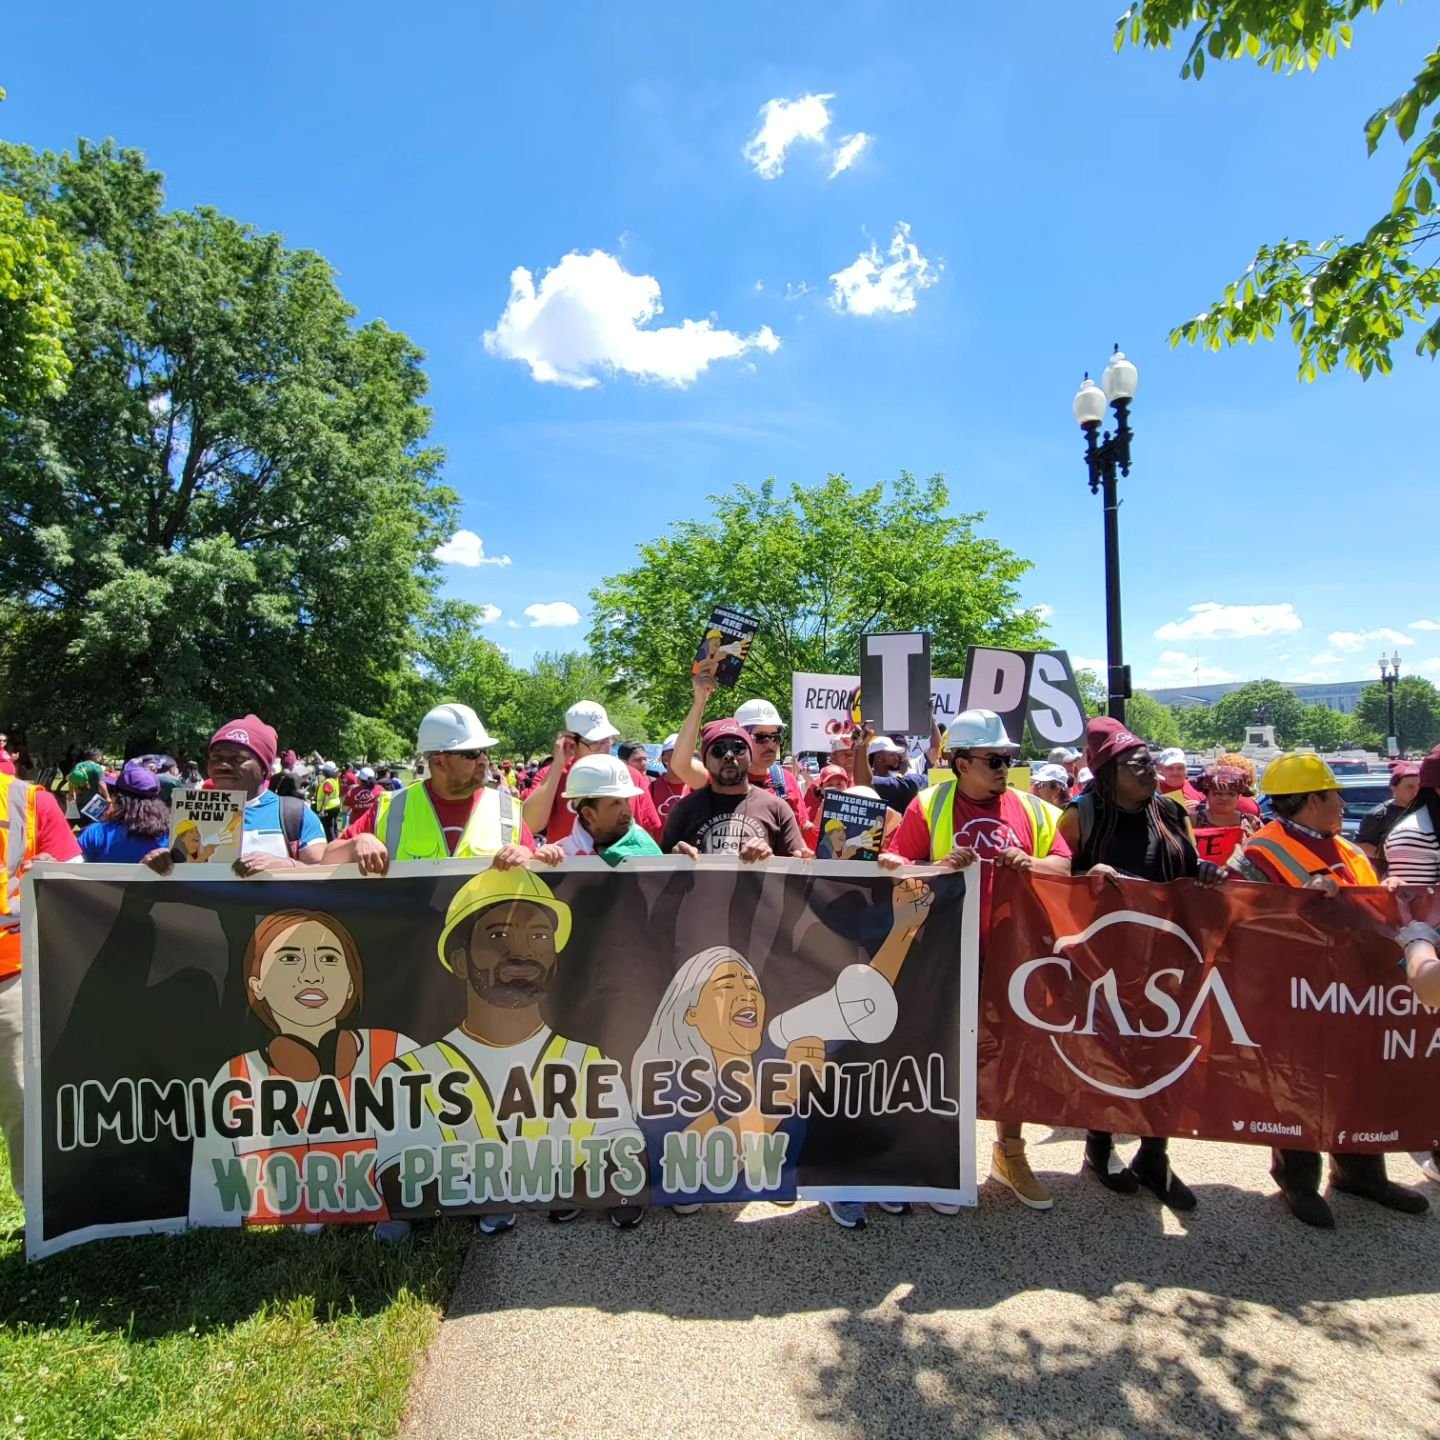 LCLAA and @lclaadcmetro Chapter joined la marcha de los Trabajadores Inmigrantes to commemorate International Workers Day in #washingtondc on May 1st. We support Immigrant Workers and their fight for work permits #internationalworkersday #diadelostra